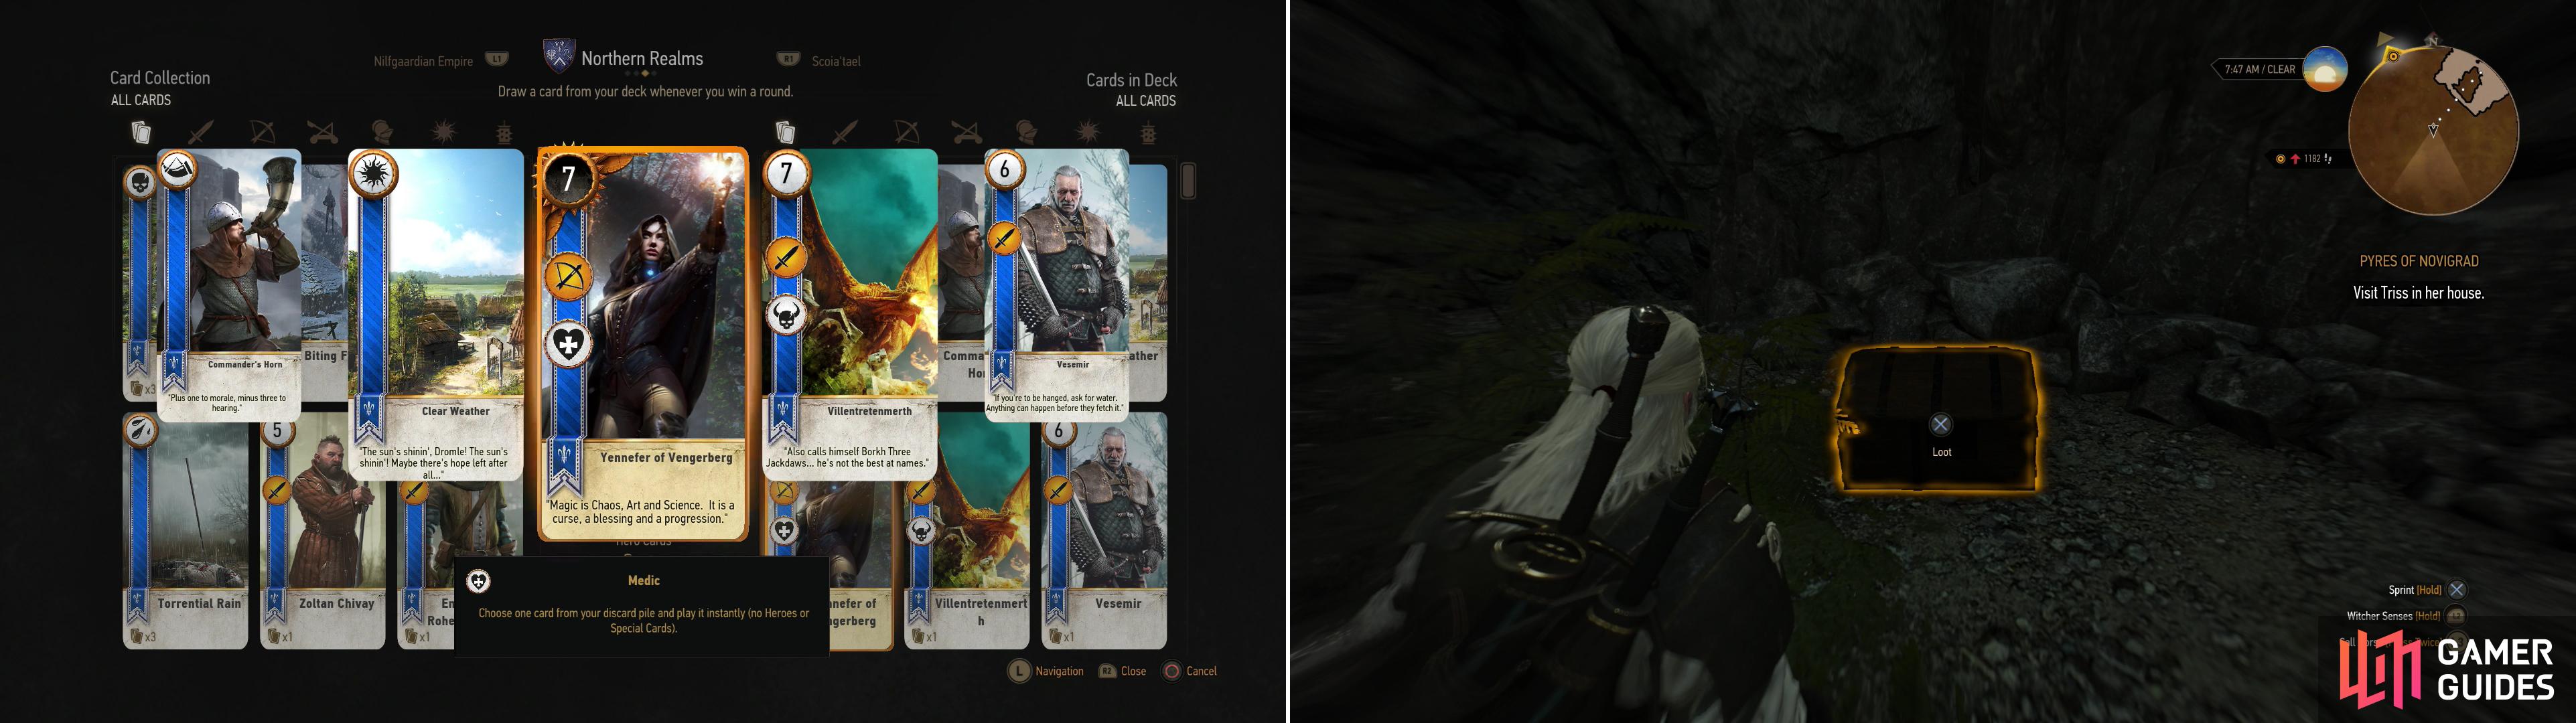 Defeat Stjepen to win the Yennefer of Vengerberg card (left). Seach Codger's Quarry to find a chest containing the Diagram: Enhanced Feline Gauntlets (right).